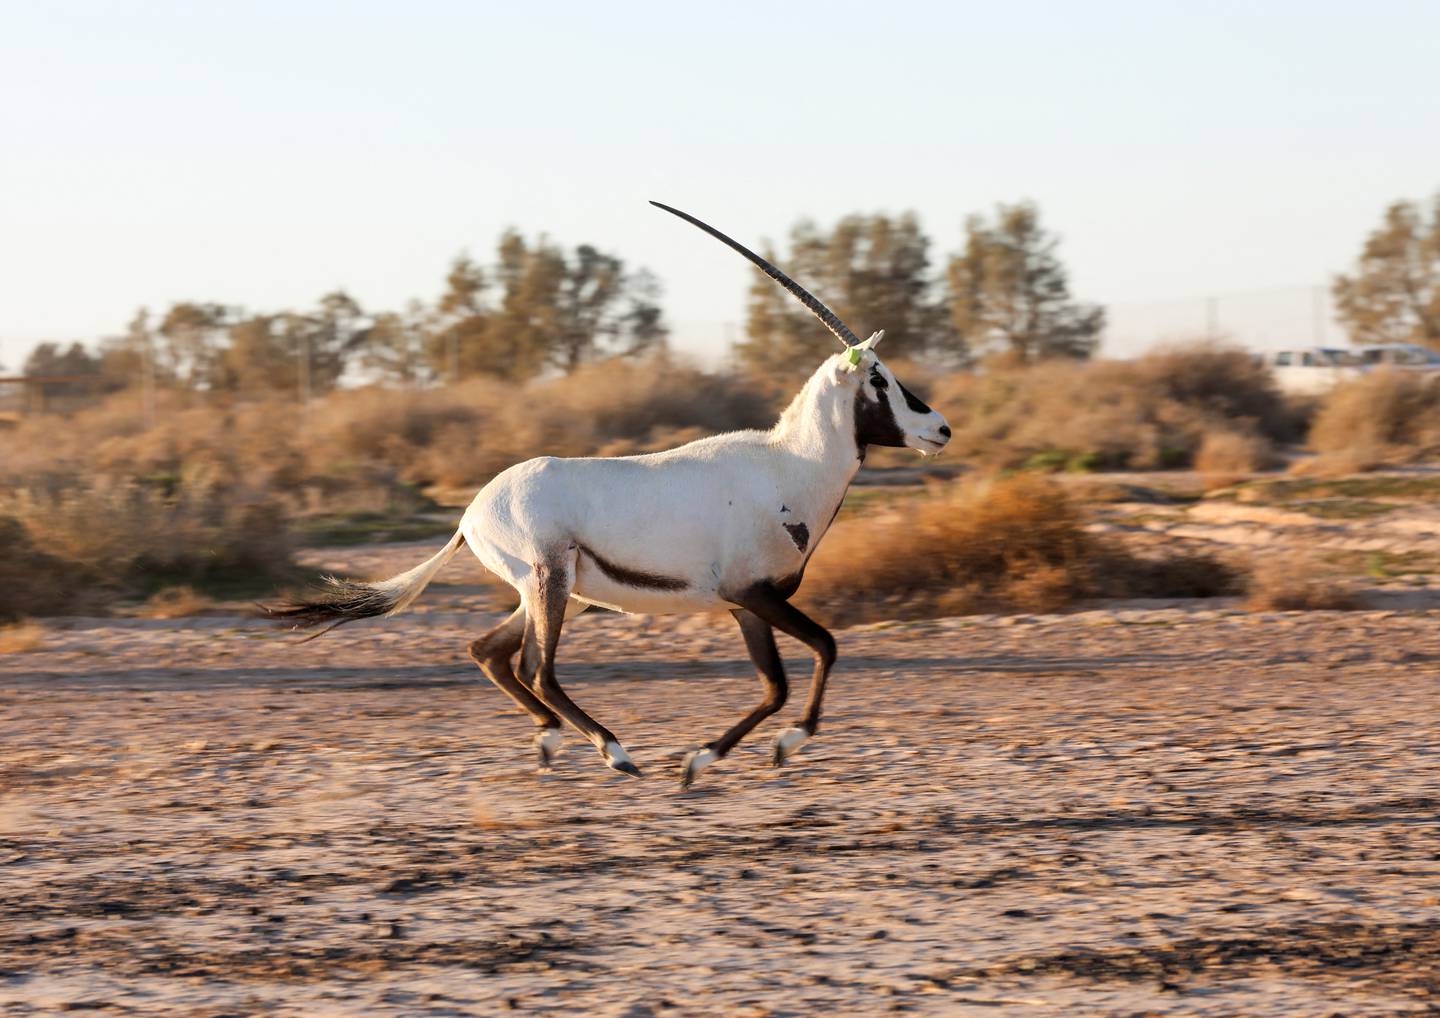 An Arabian oryx imported from Abu Dhabi at Shaumari Wildlife Reserve after being released in Azraq, Jordan. Reuters